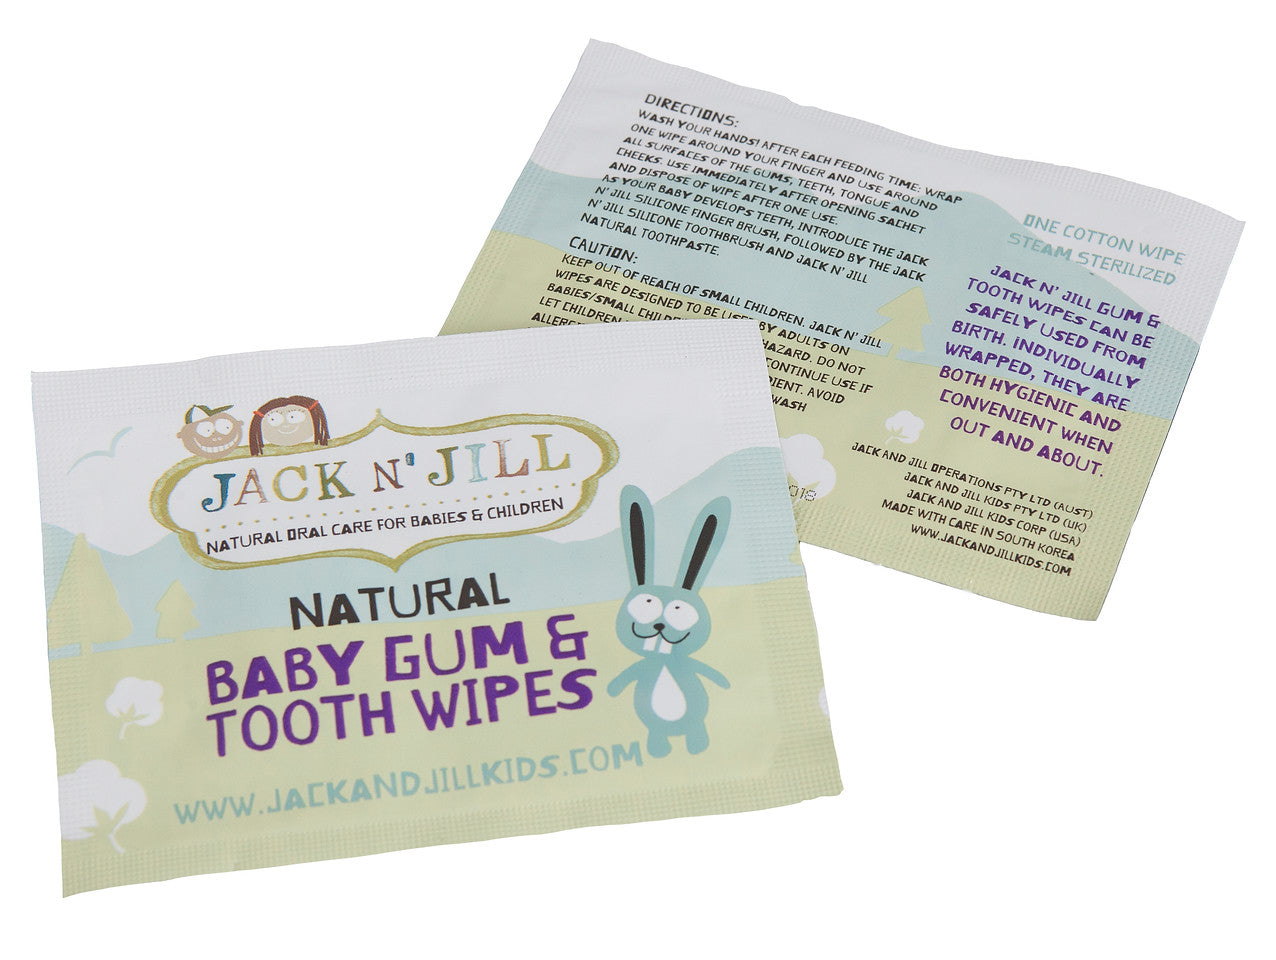 Jack N Jill Baby Gum and Tooth Wipes - 25 pack